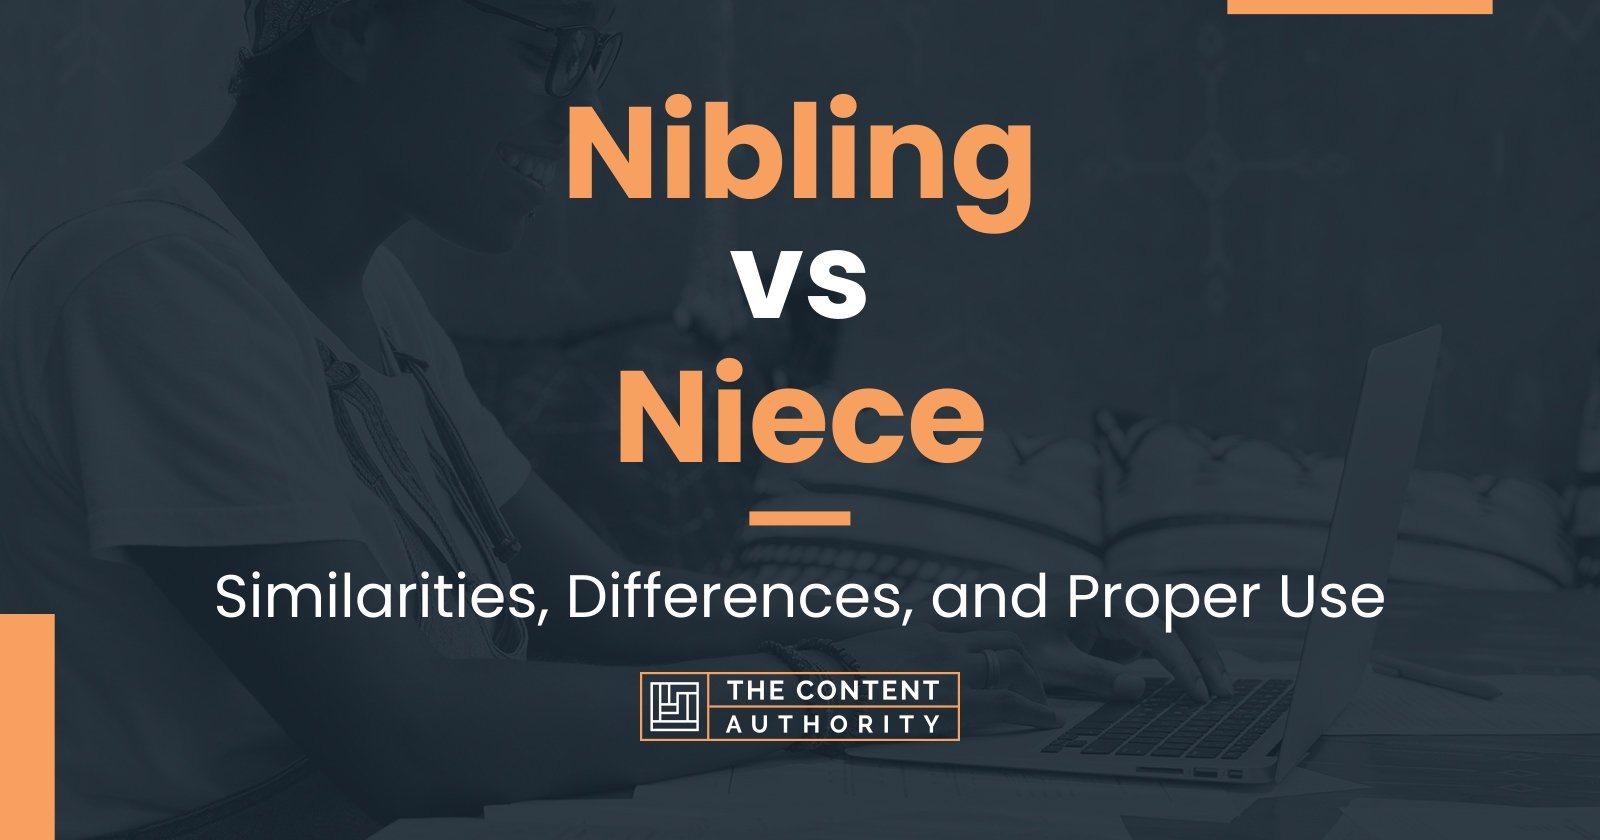 Nibling vs Niece: Similarities, Differences, and Proper Use